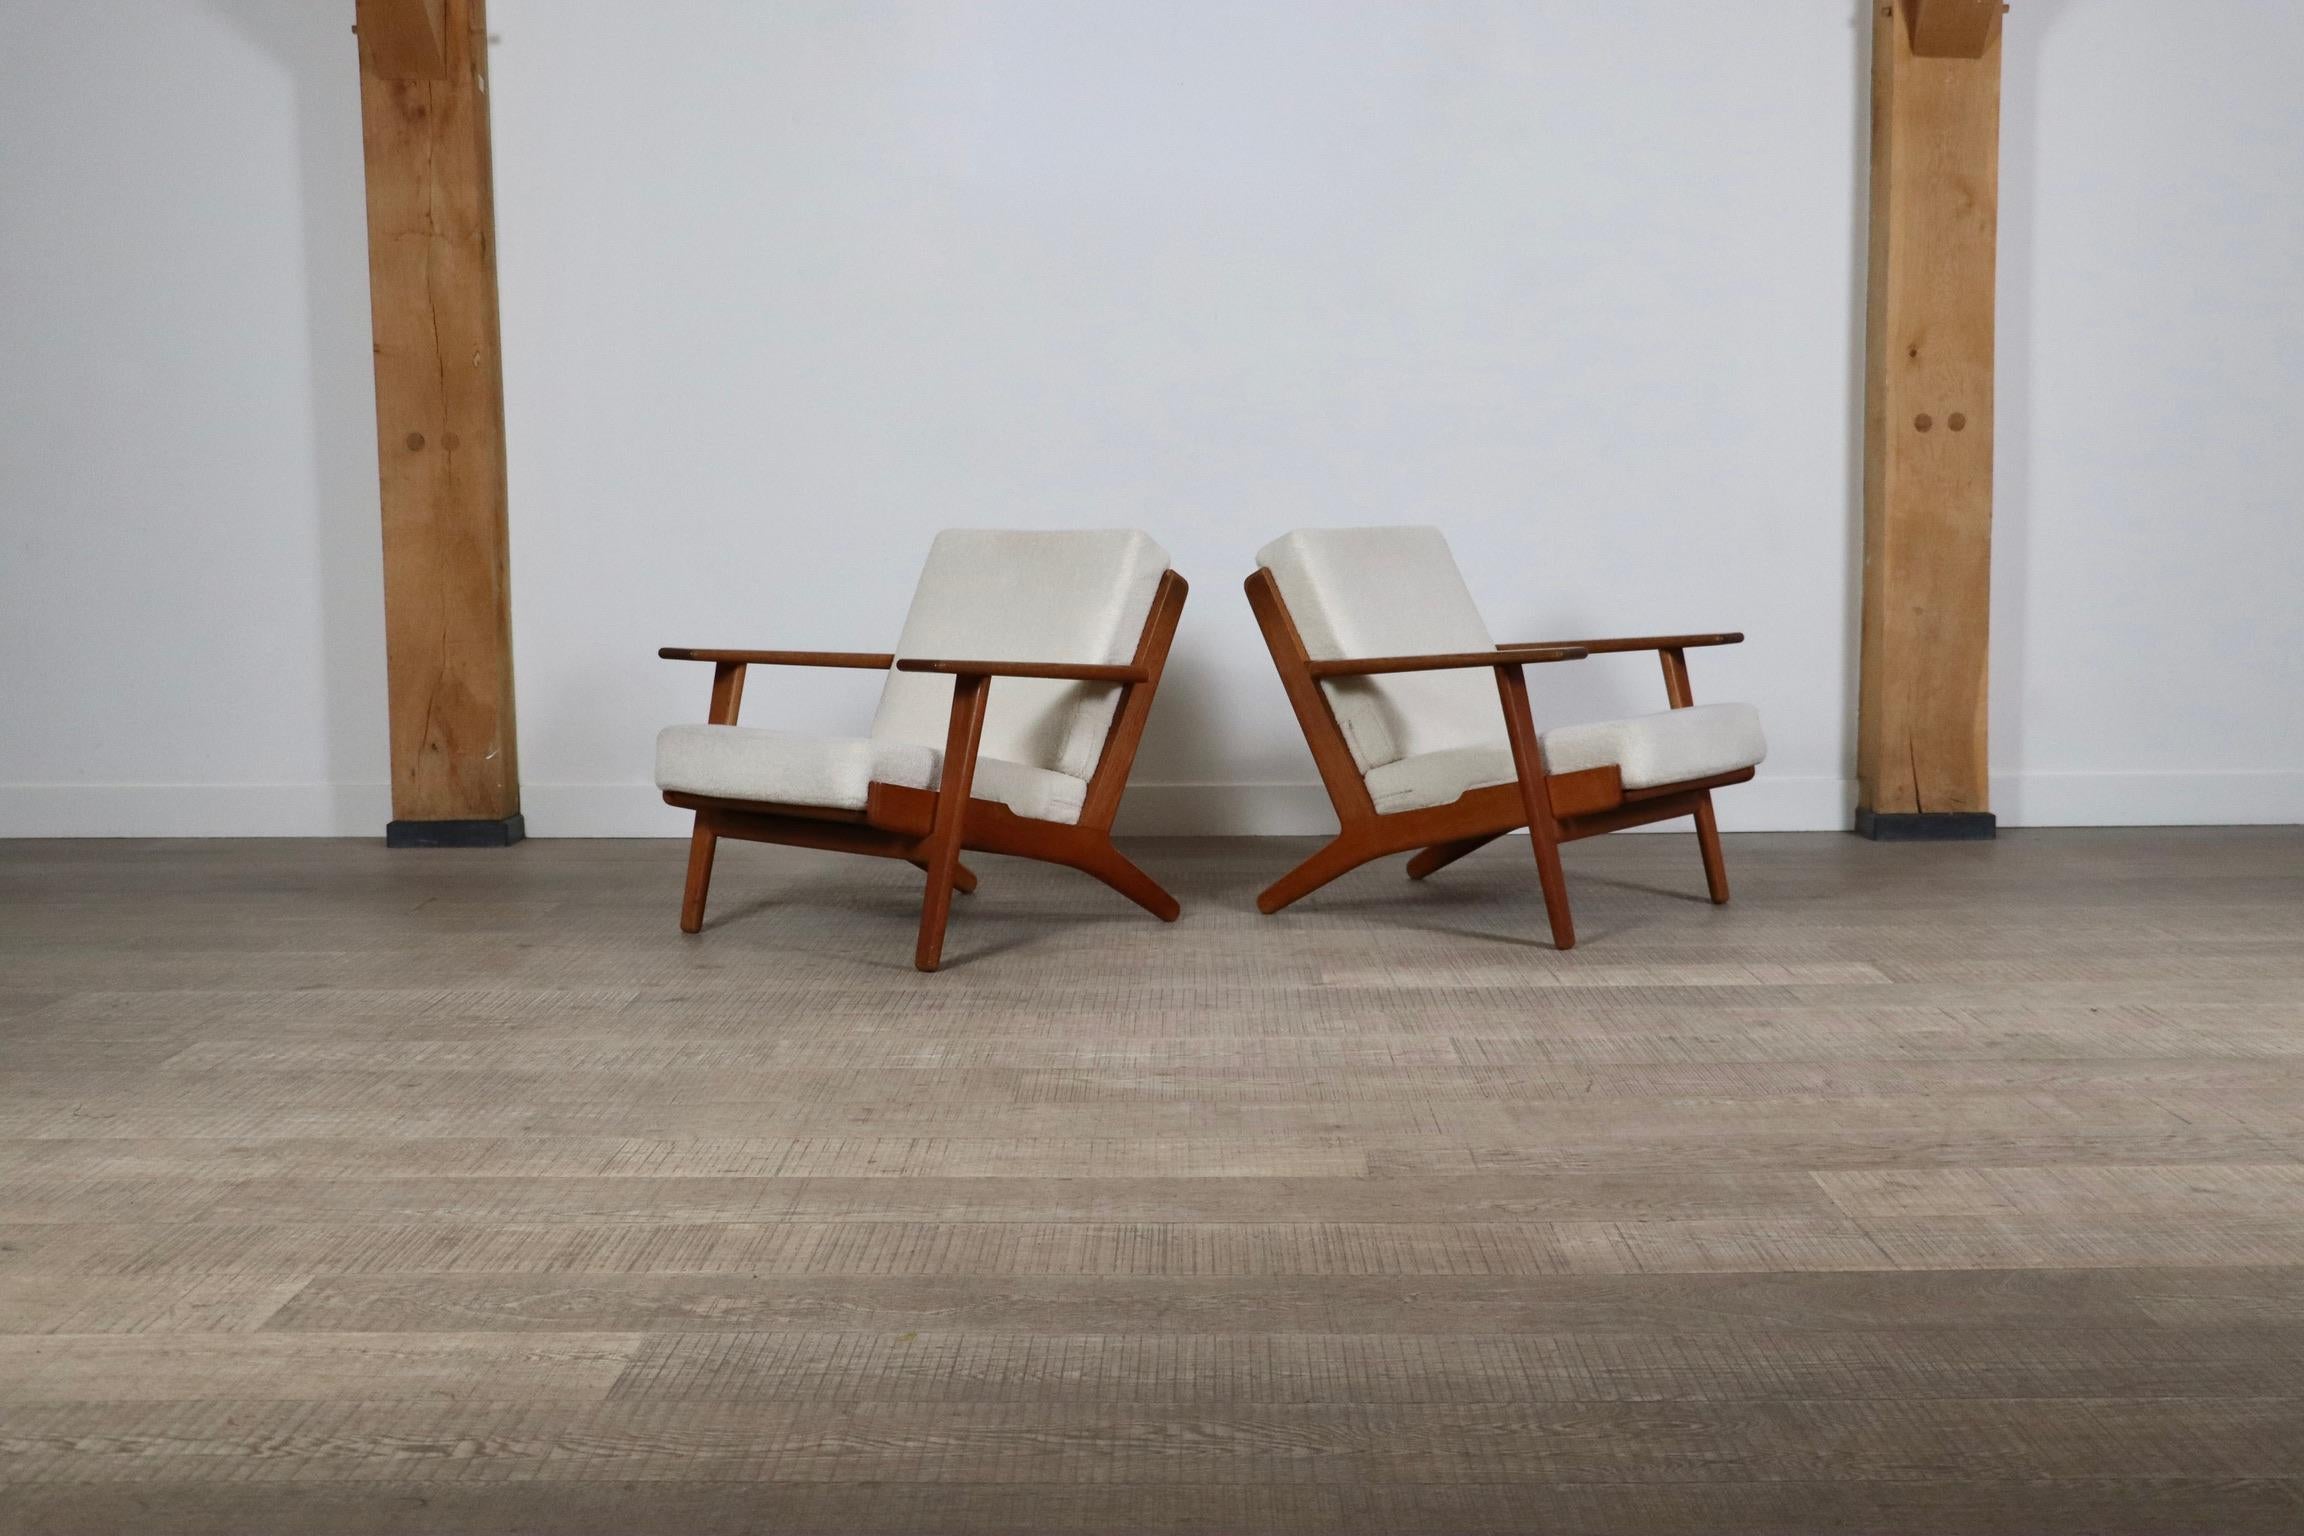 Nice pair of GE290 armchairs by Hans Wegner for Getama, 1950s. Solid oak frame with original sprung cushions newly upholstered in a bouclé fabric to add to the comfort of the design. This model is also known as the “plank chair” referring to the